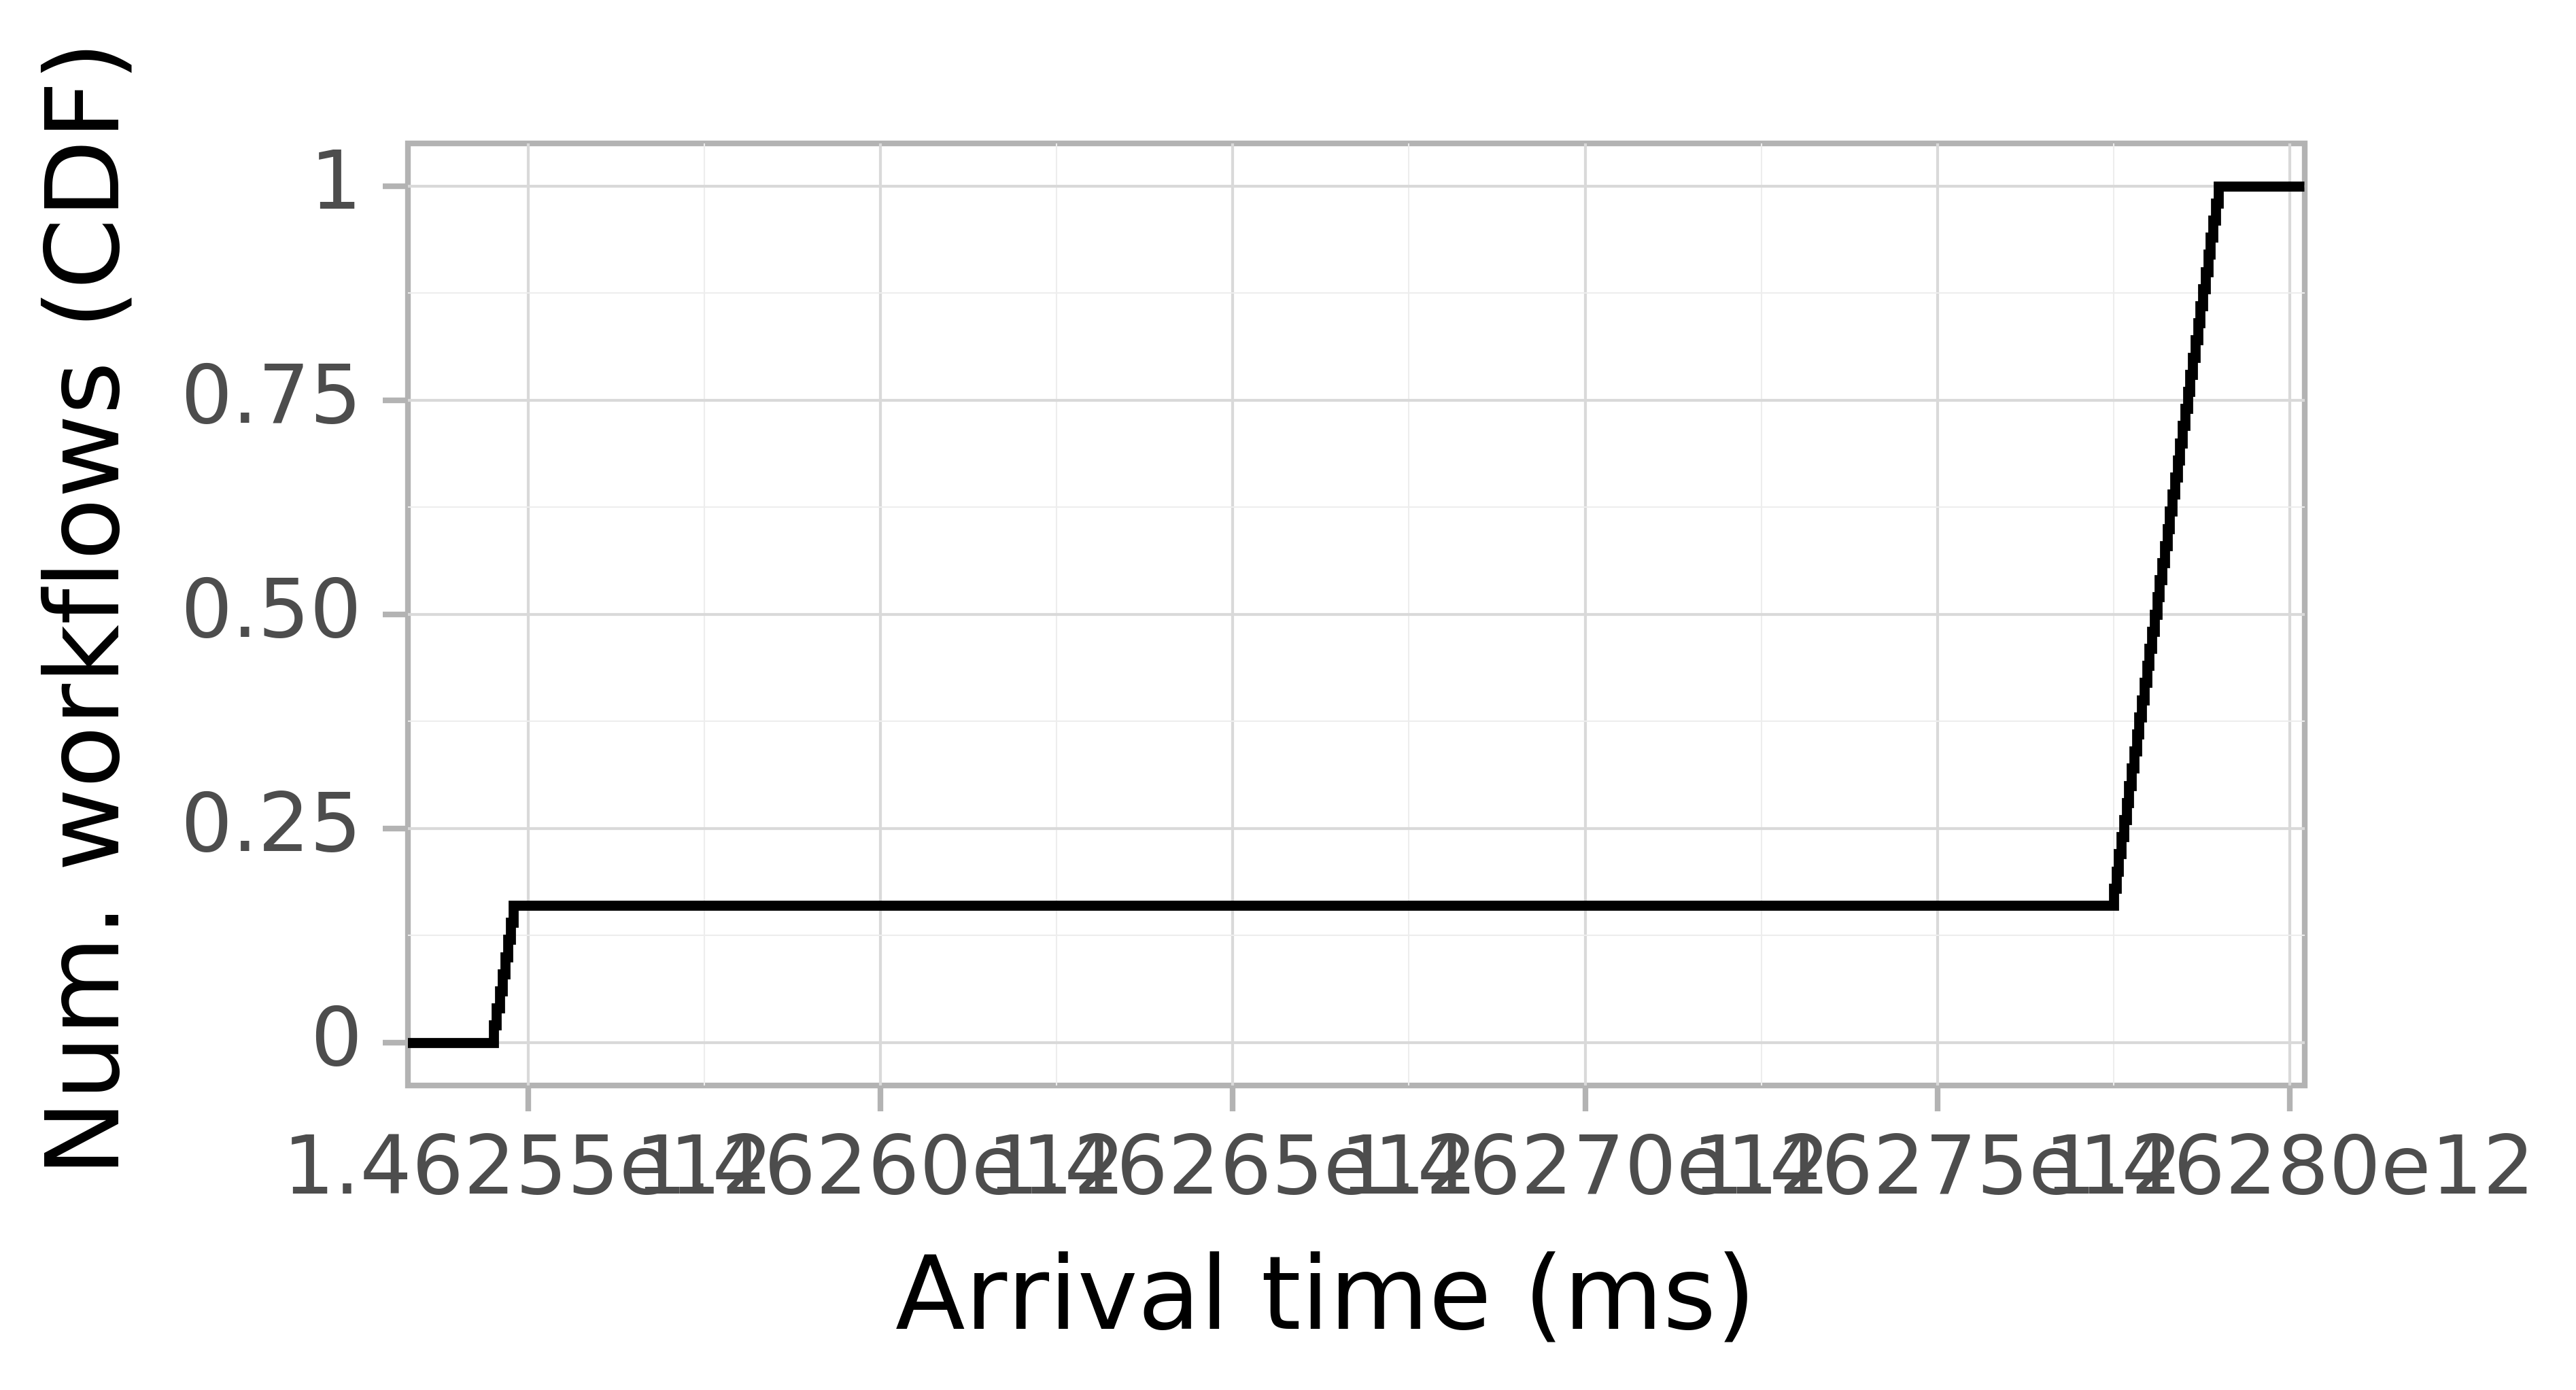 Job arrival CDF graph for the askalon-new_ee54 trace.